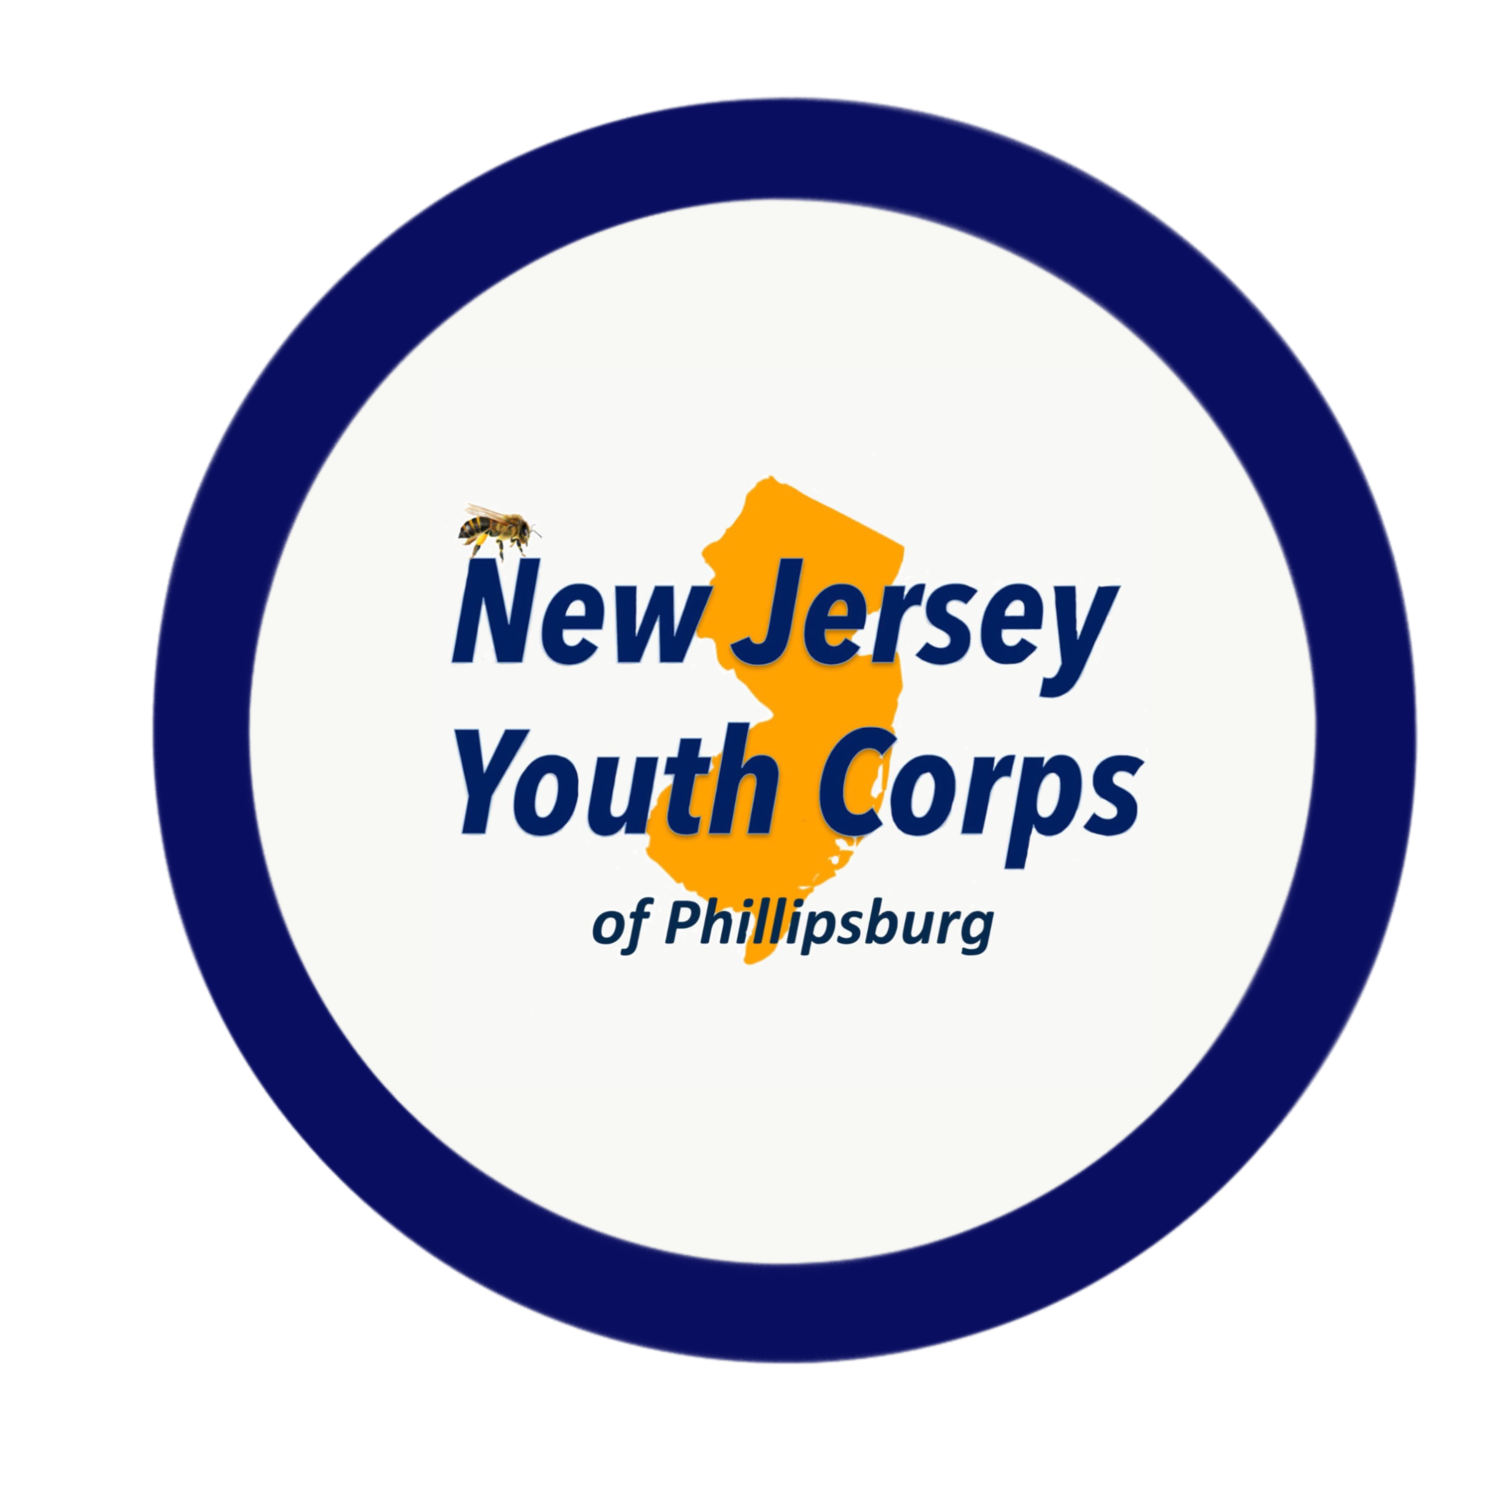 New Jersey Youth Corps of Phillipsburg